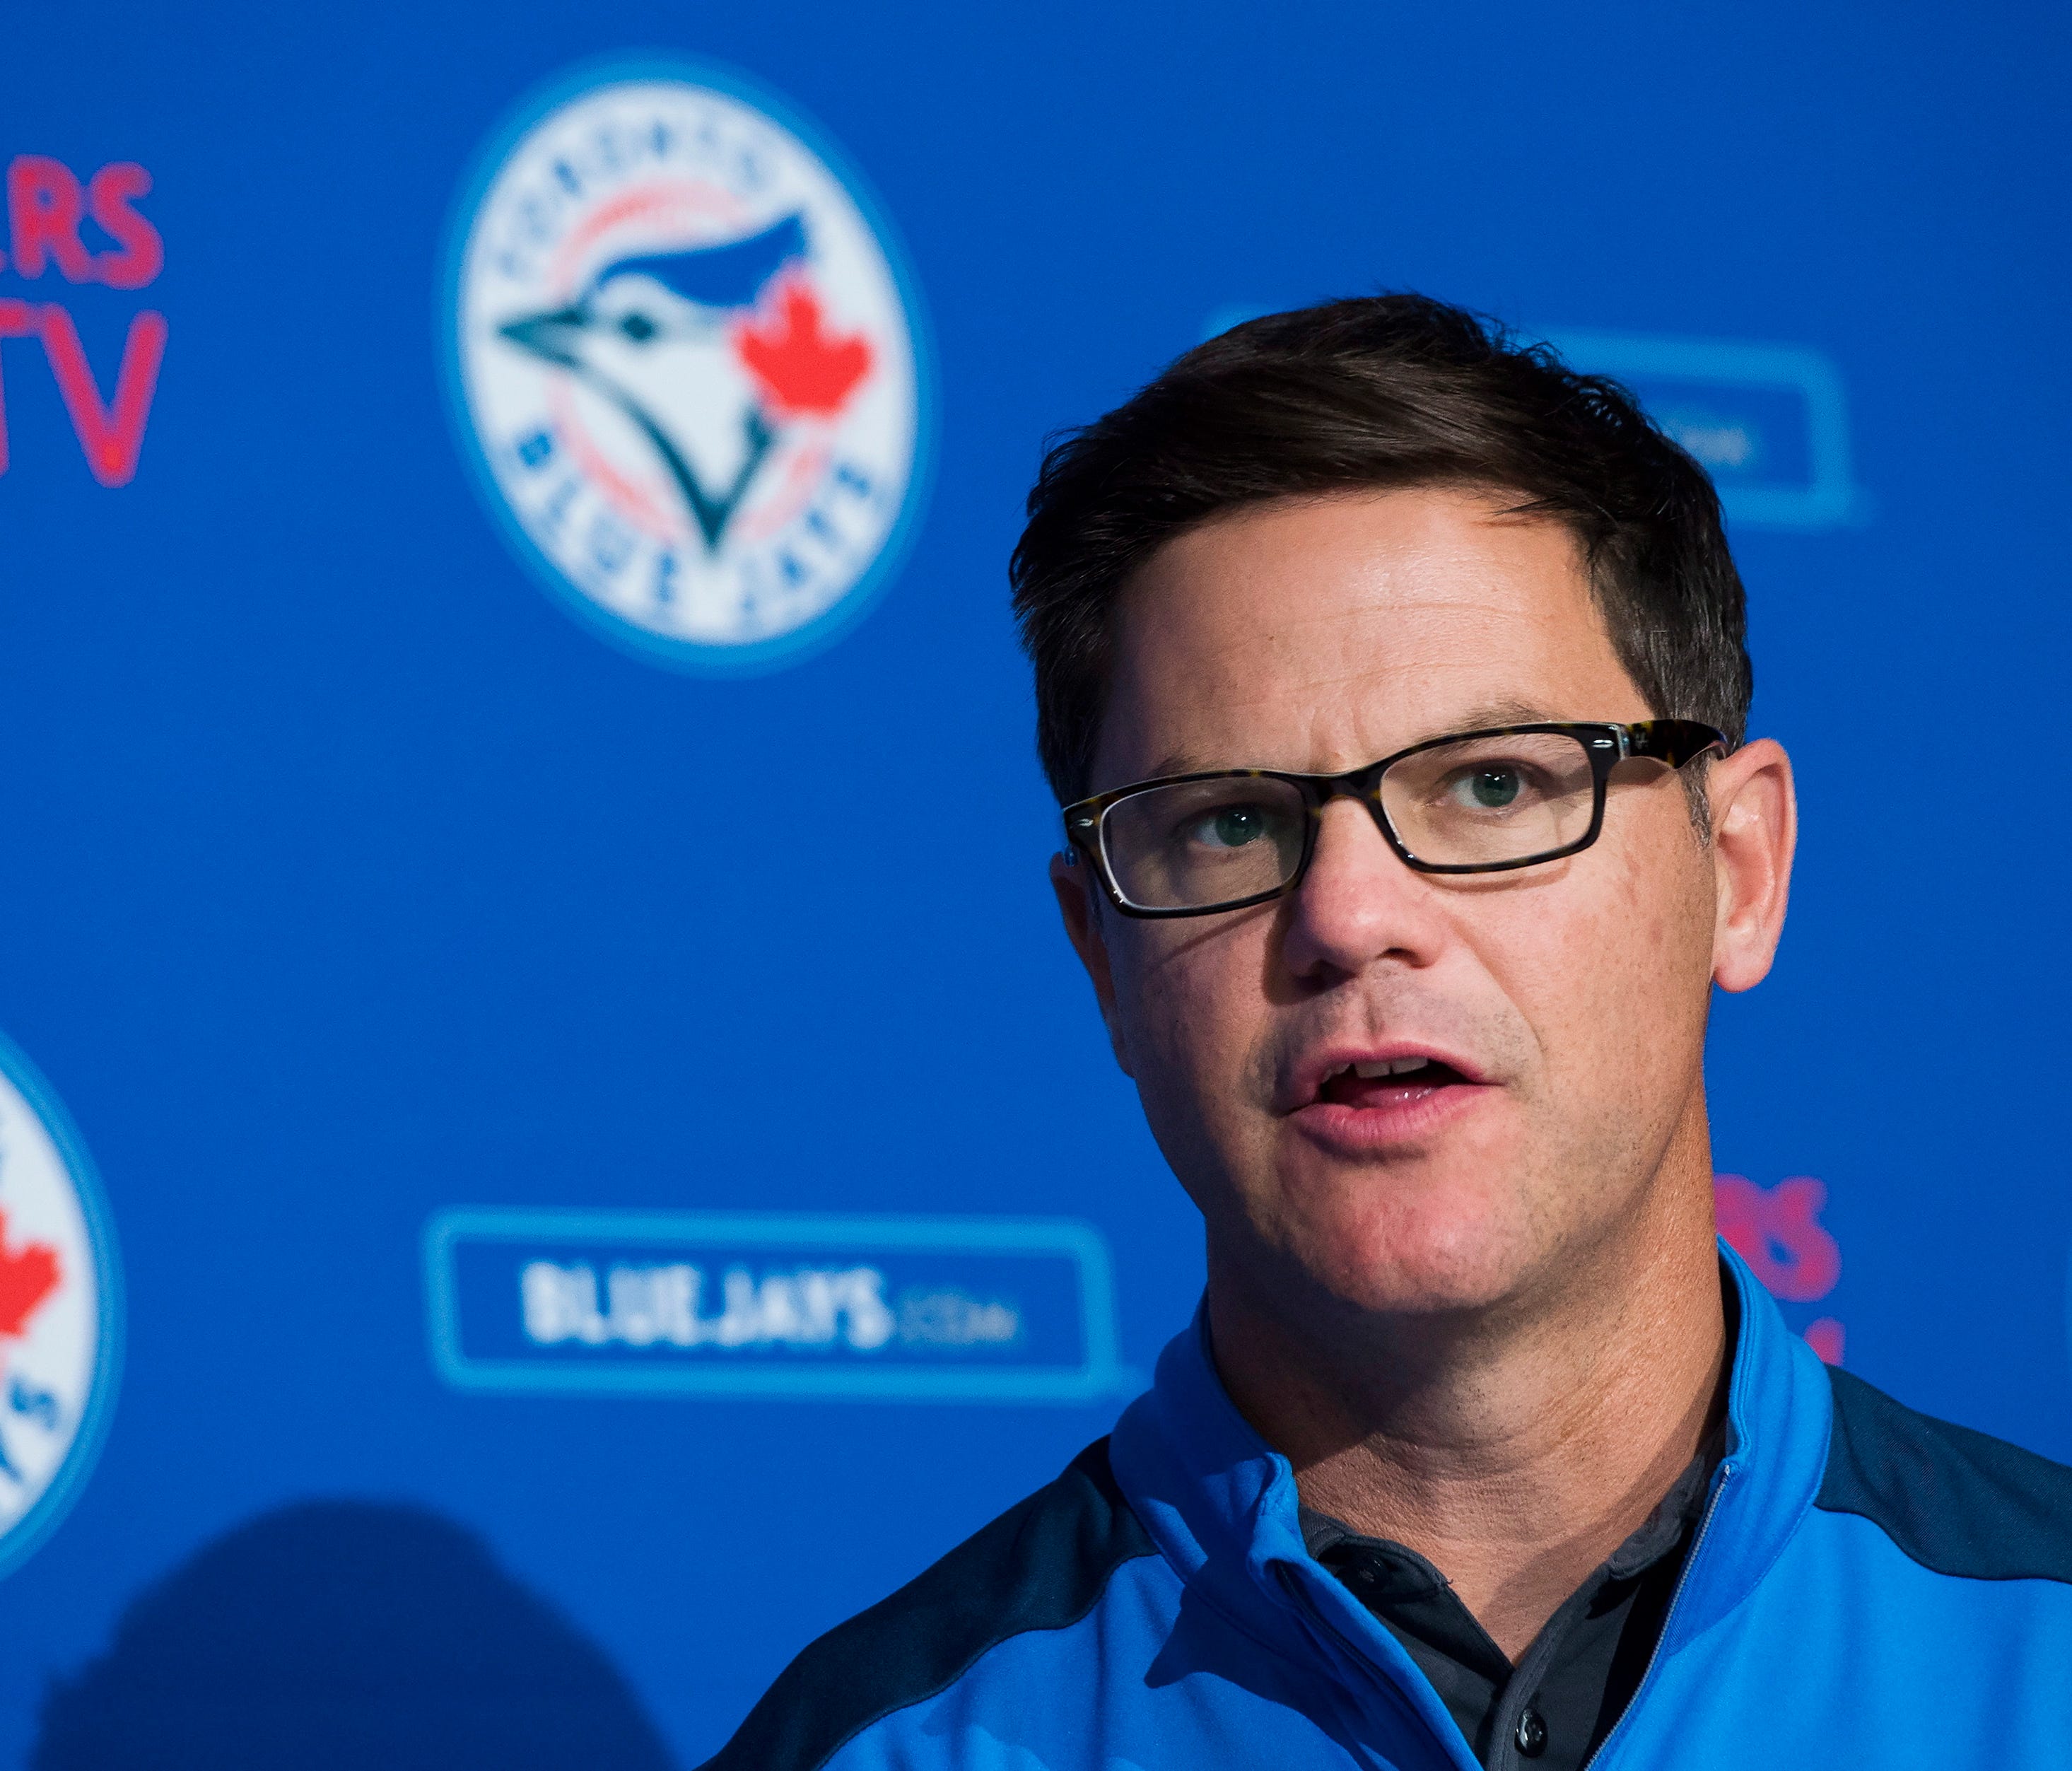 Toronto Blue Jays general manager Ross Atkins speaks to the media during a press conference in Toronto, Tuesday, Oct. 3, 2017. (Nathan Denette/The Canadian Press via AP)